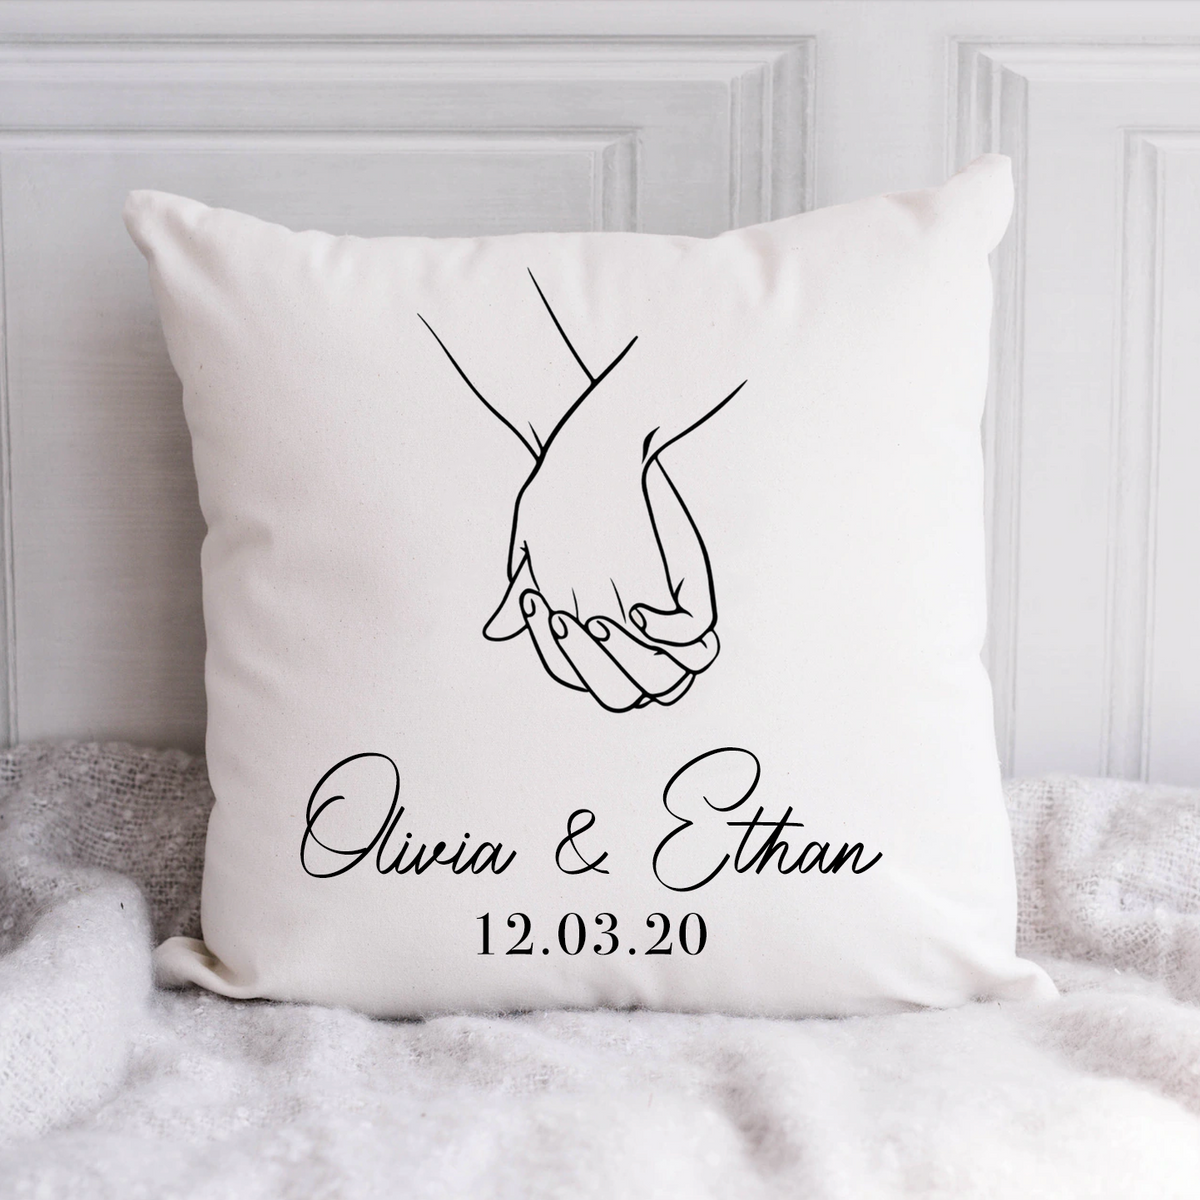 Throw Pillow Let's Stay in Bed Anniversary, Calligraphy, Home Decor,  Wedding Gift, Engagement Present, Newlywed Gift, Cushion Cover 